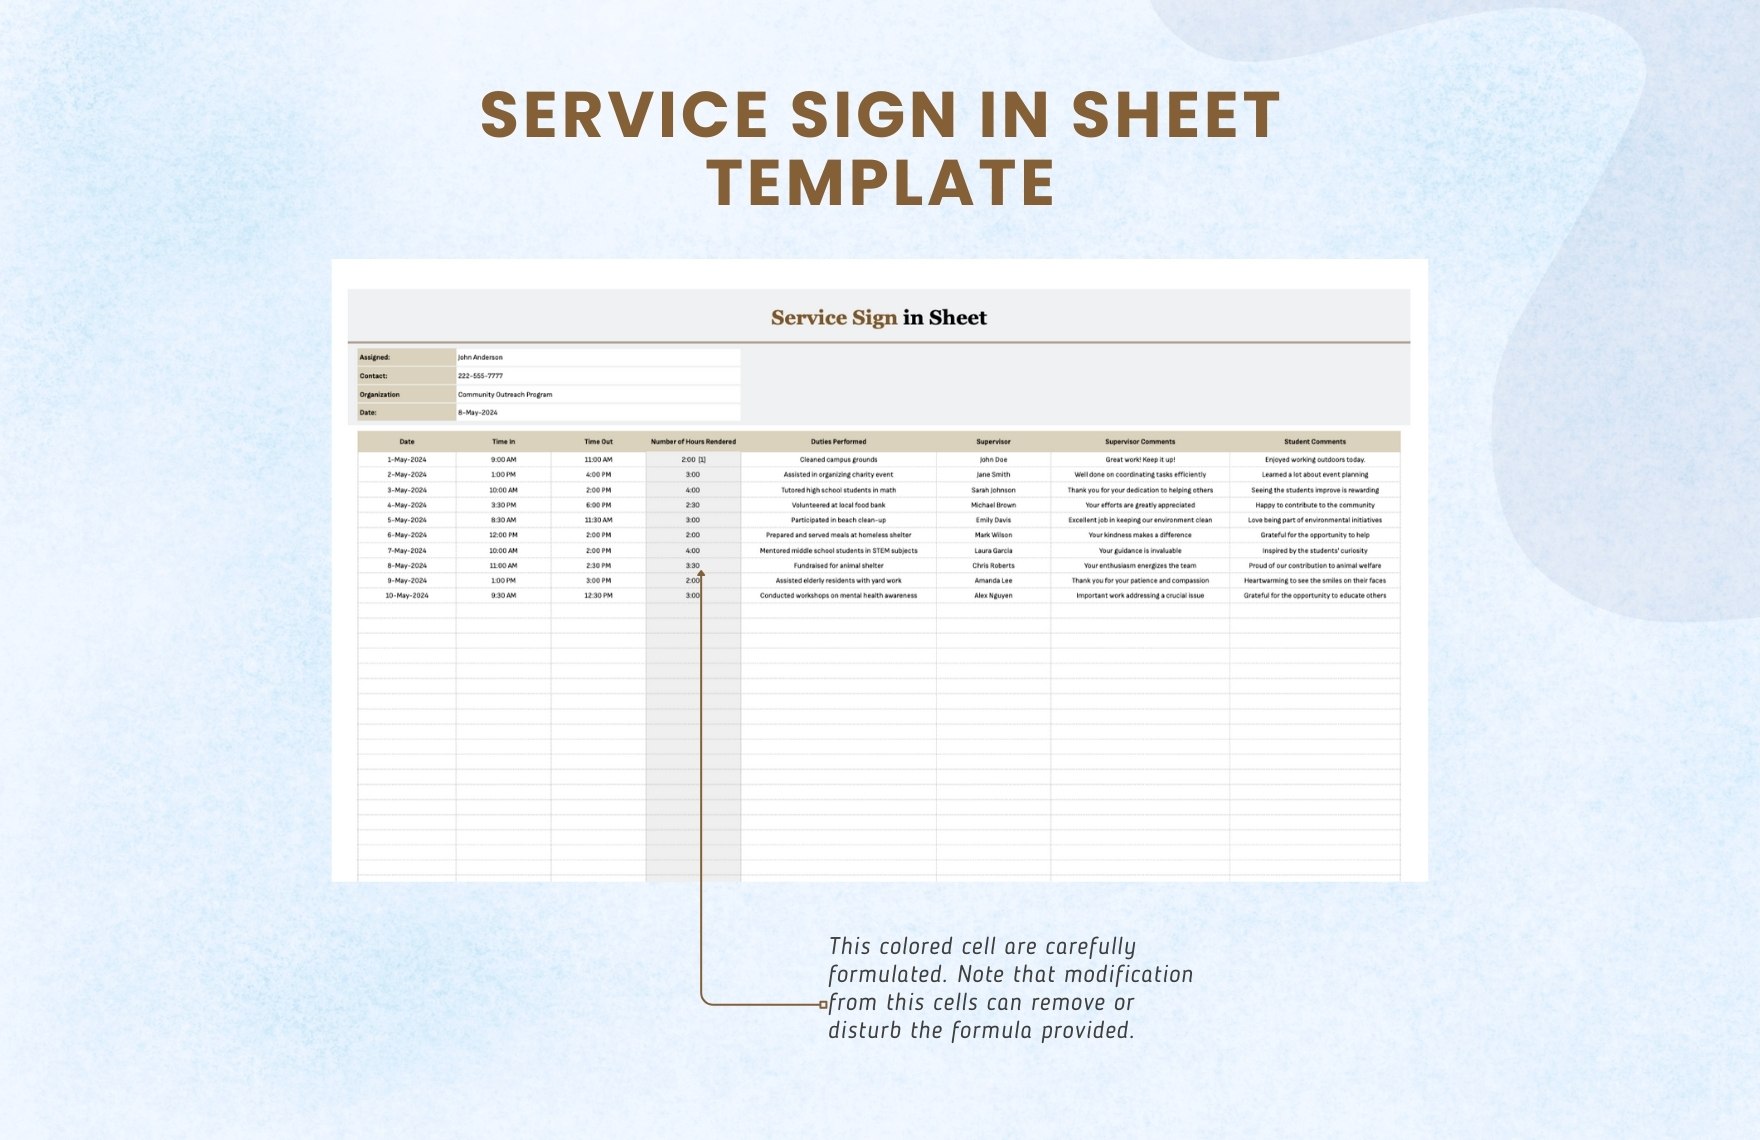 Service Sign in Sheet Template